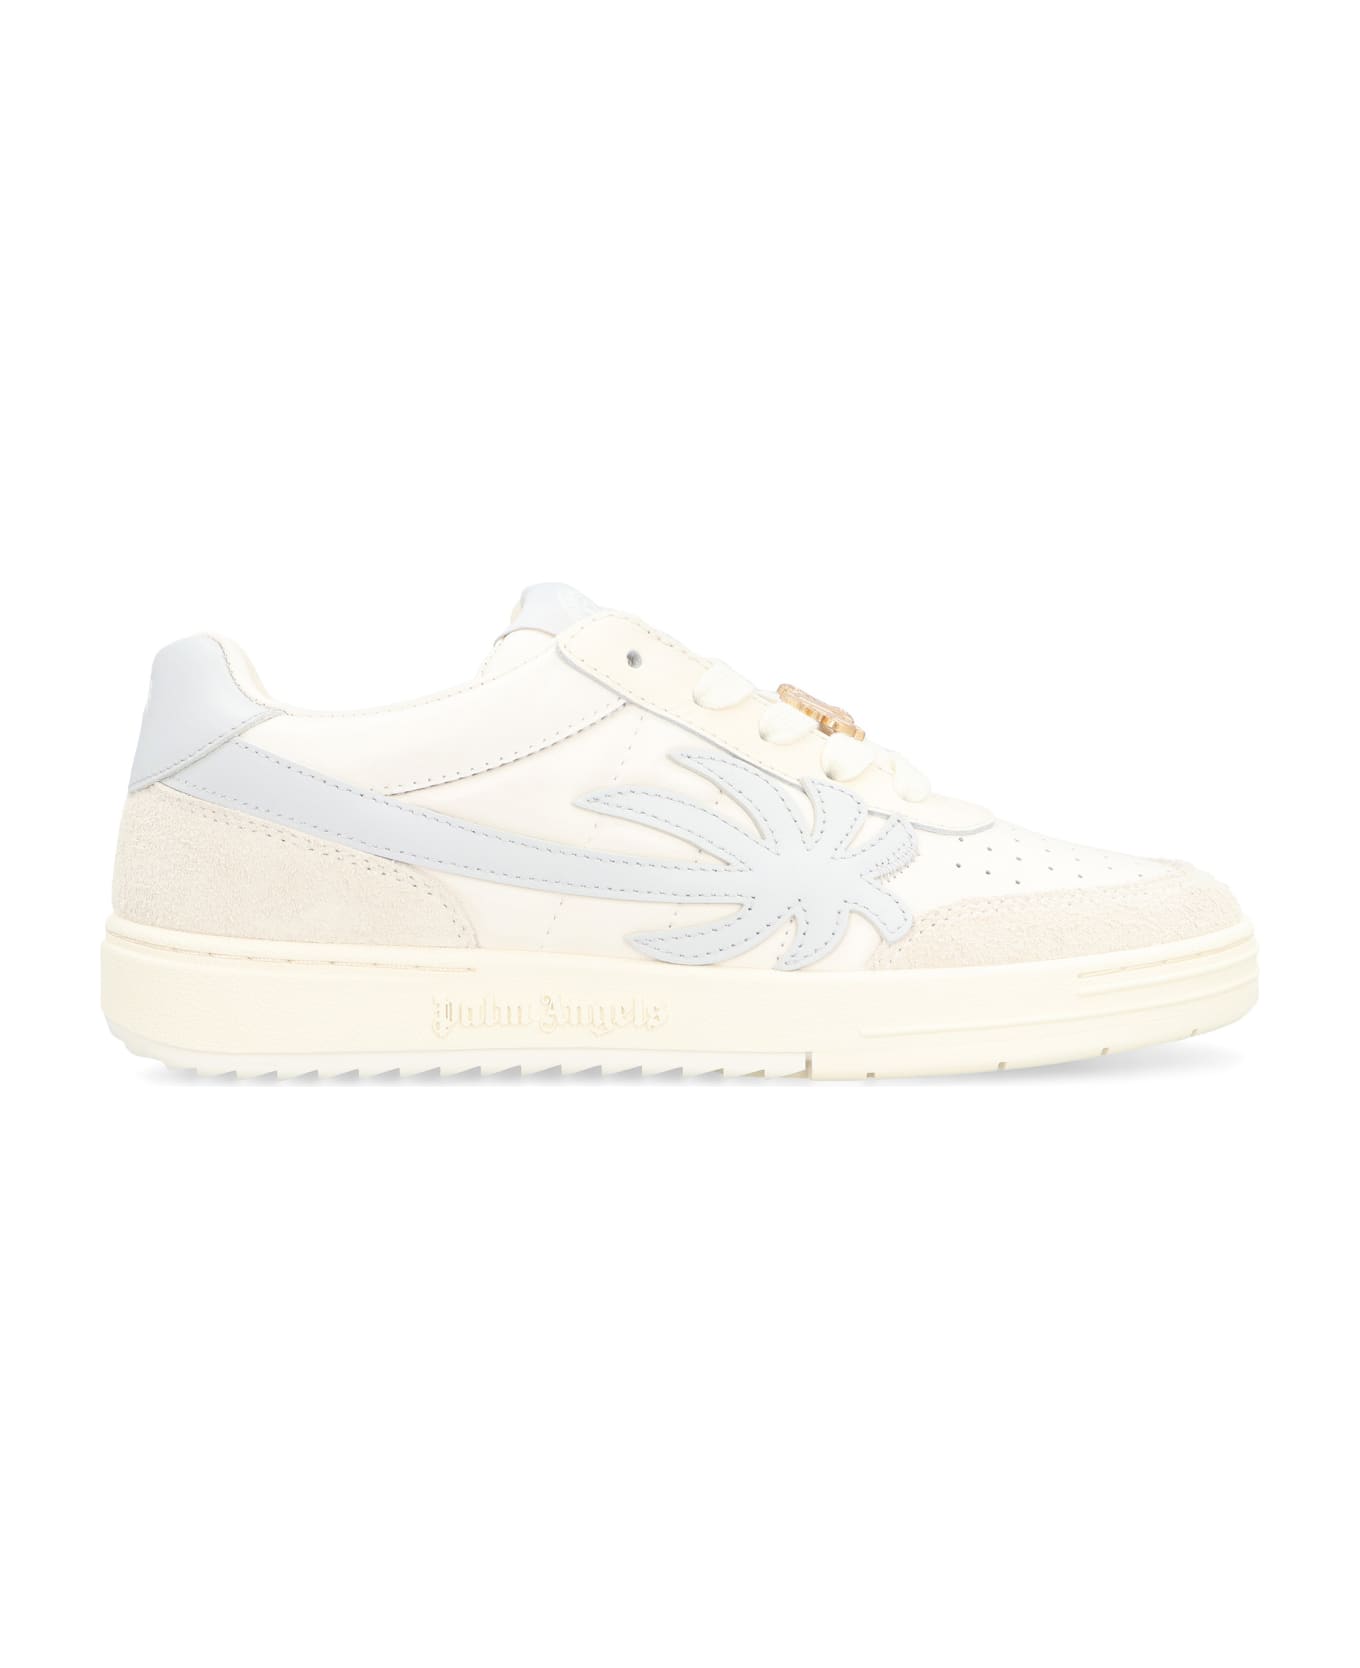 Palm Angels Palm Beach University Leather Low Sneakers - White